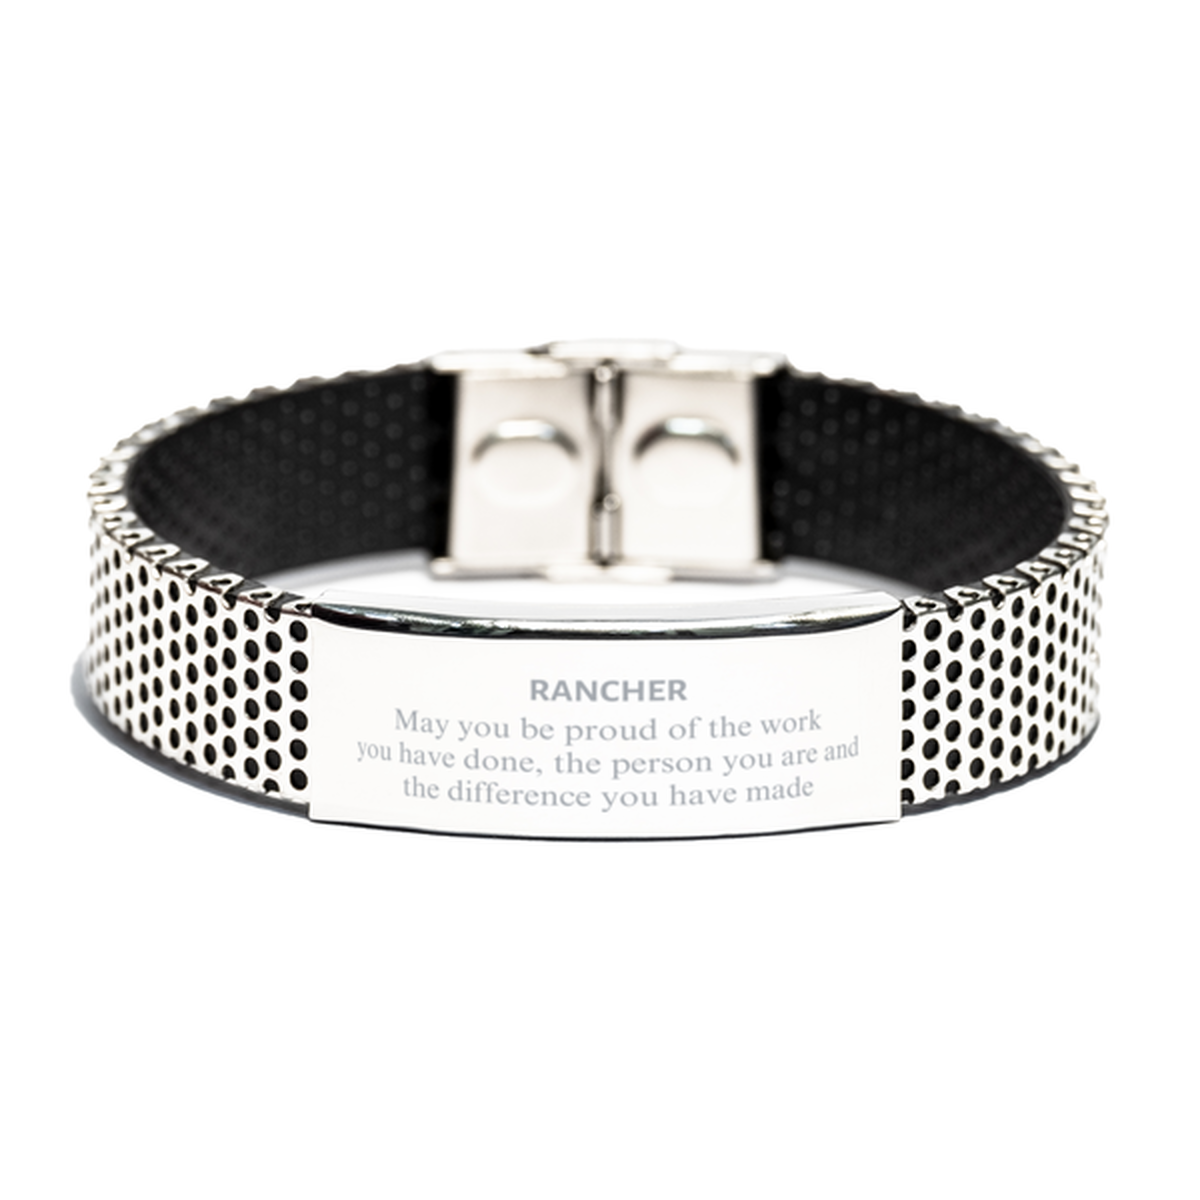 Rancher May you be proud of the work you have done, Retirement Rancher Stainless Steel Bracelet for Colleague Appreciation Gifts Amazing for Rancher